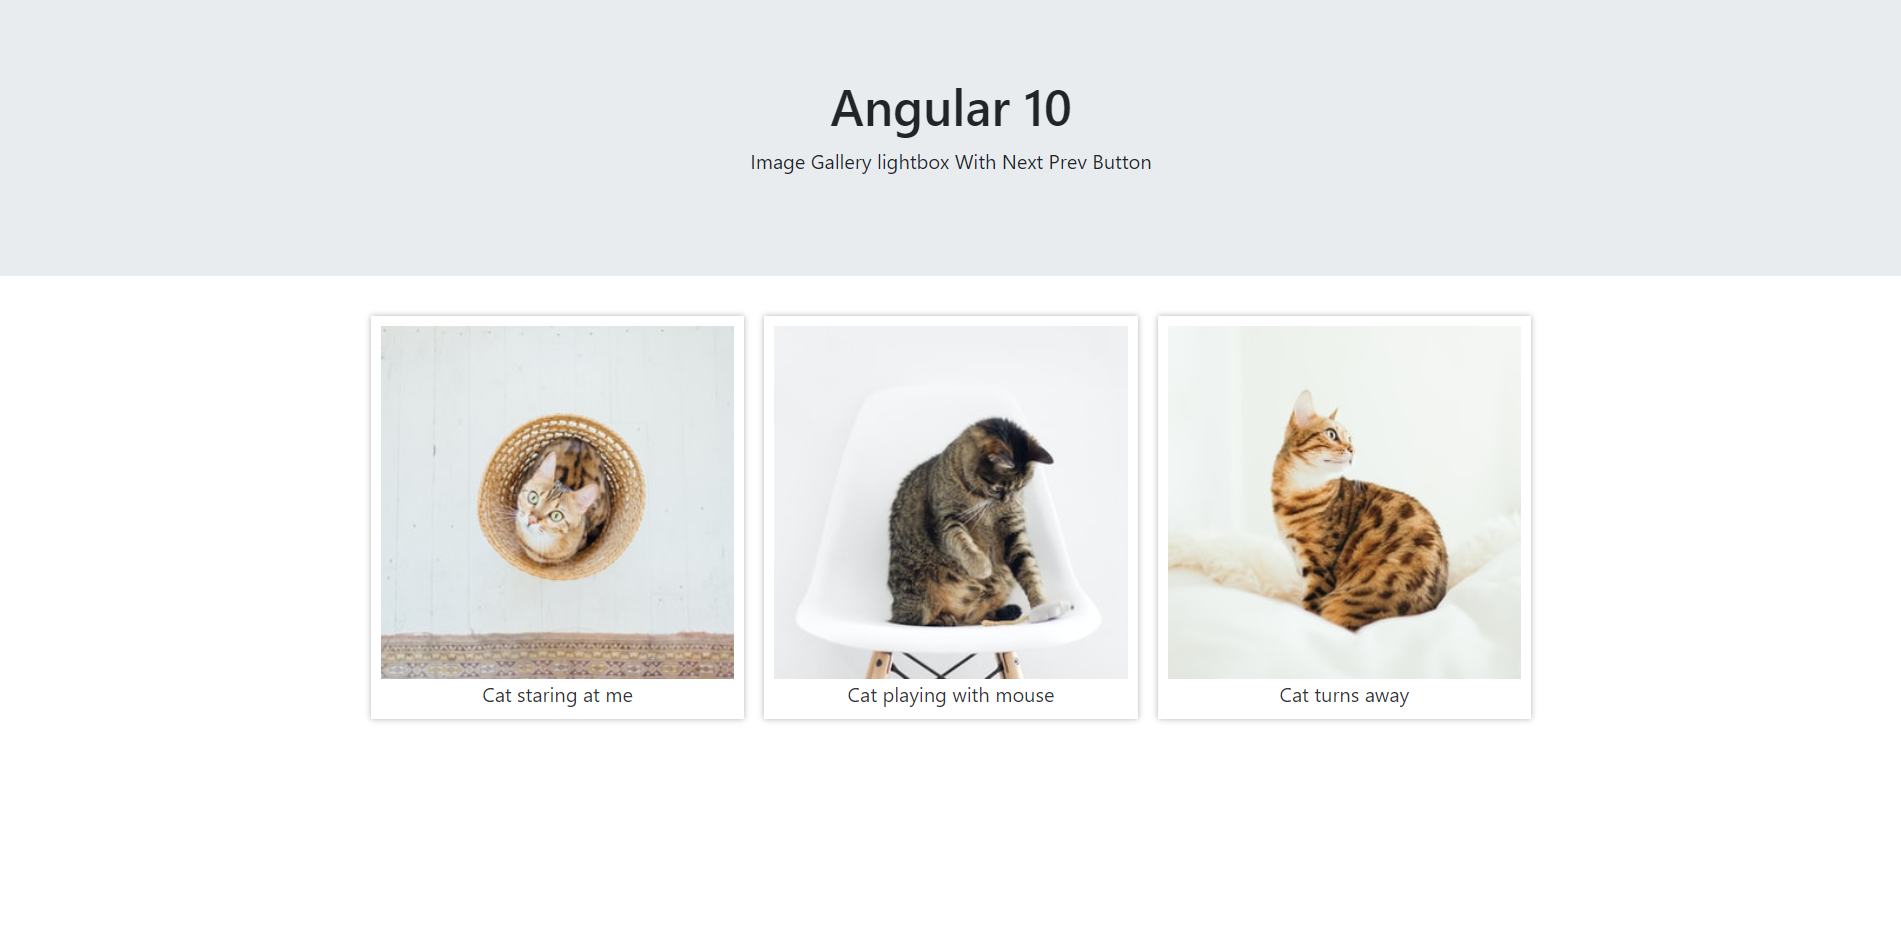 Angular 10 Image Gallery Lightbox with Next Prev Button